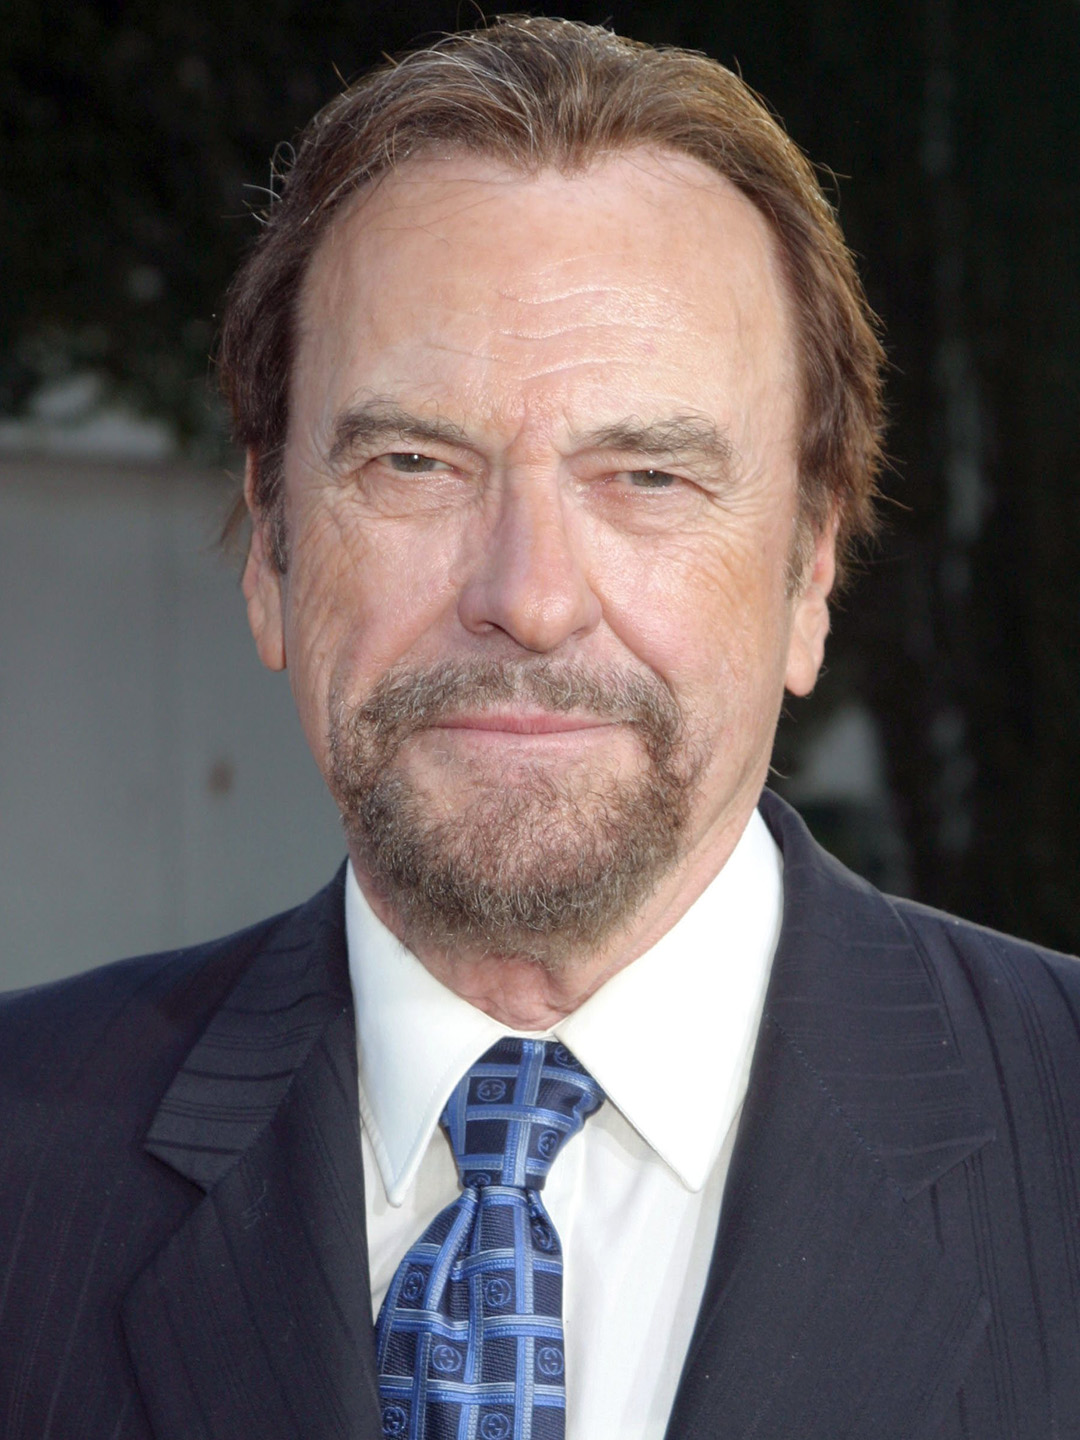 How tall is Rip Torn?